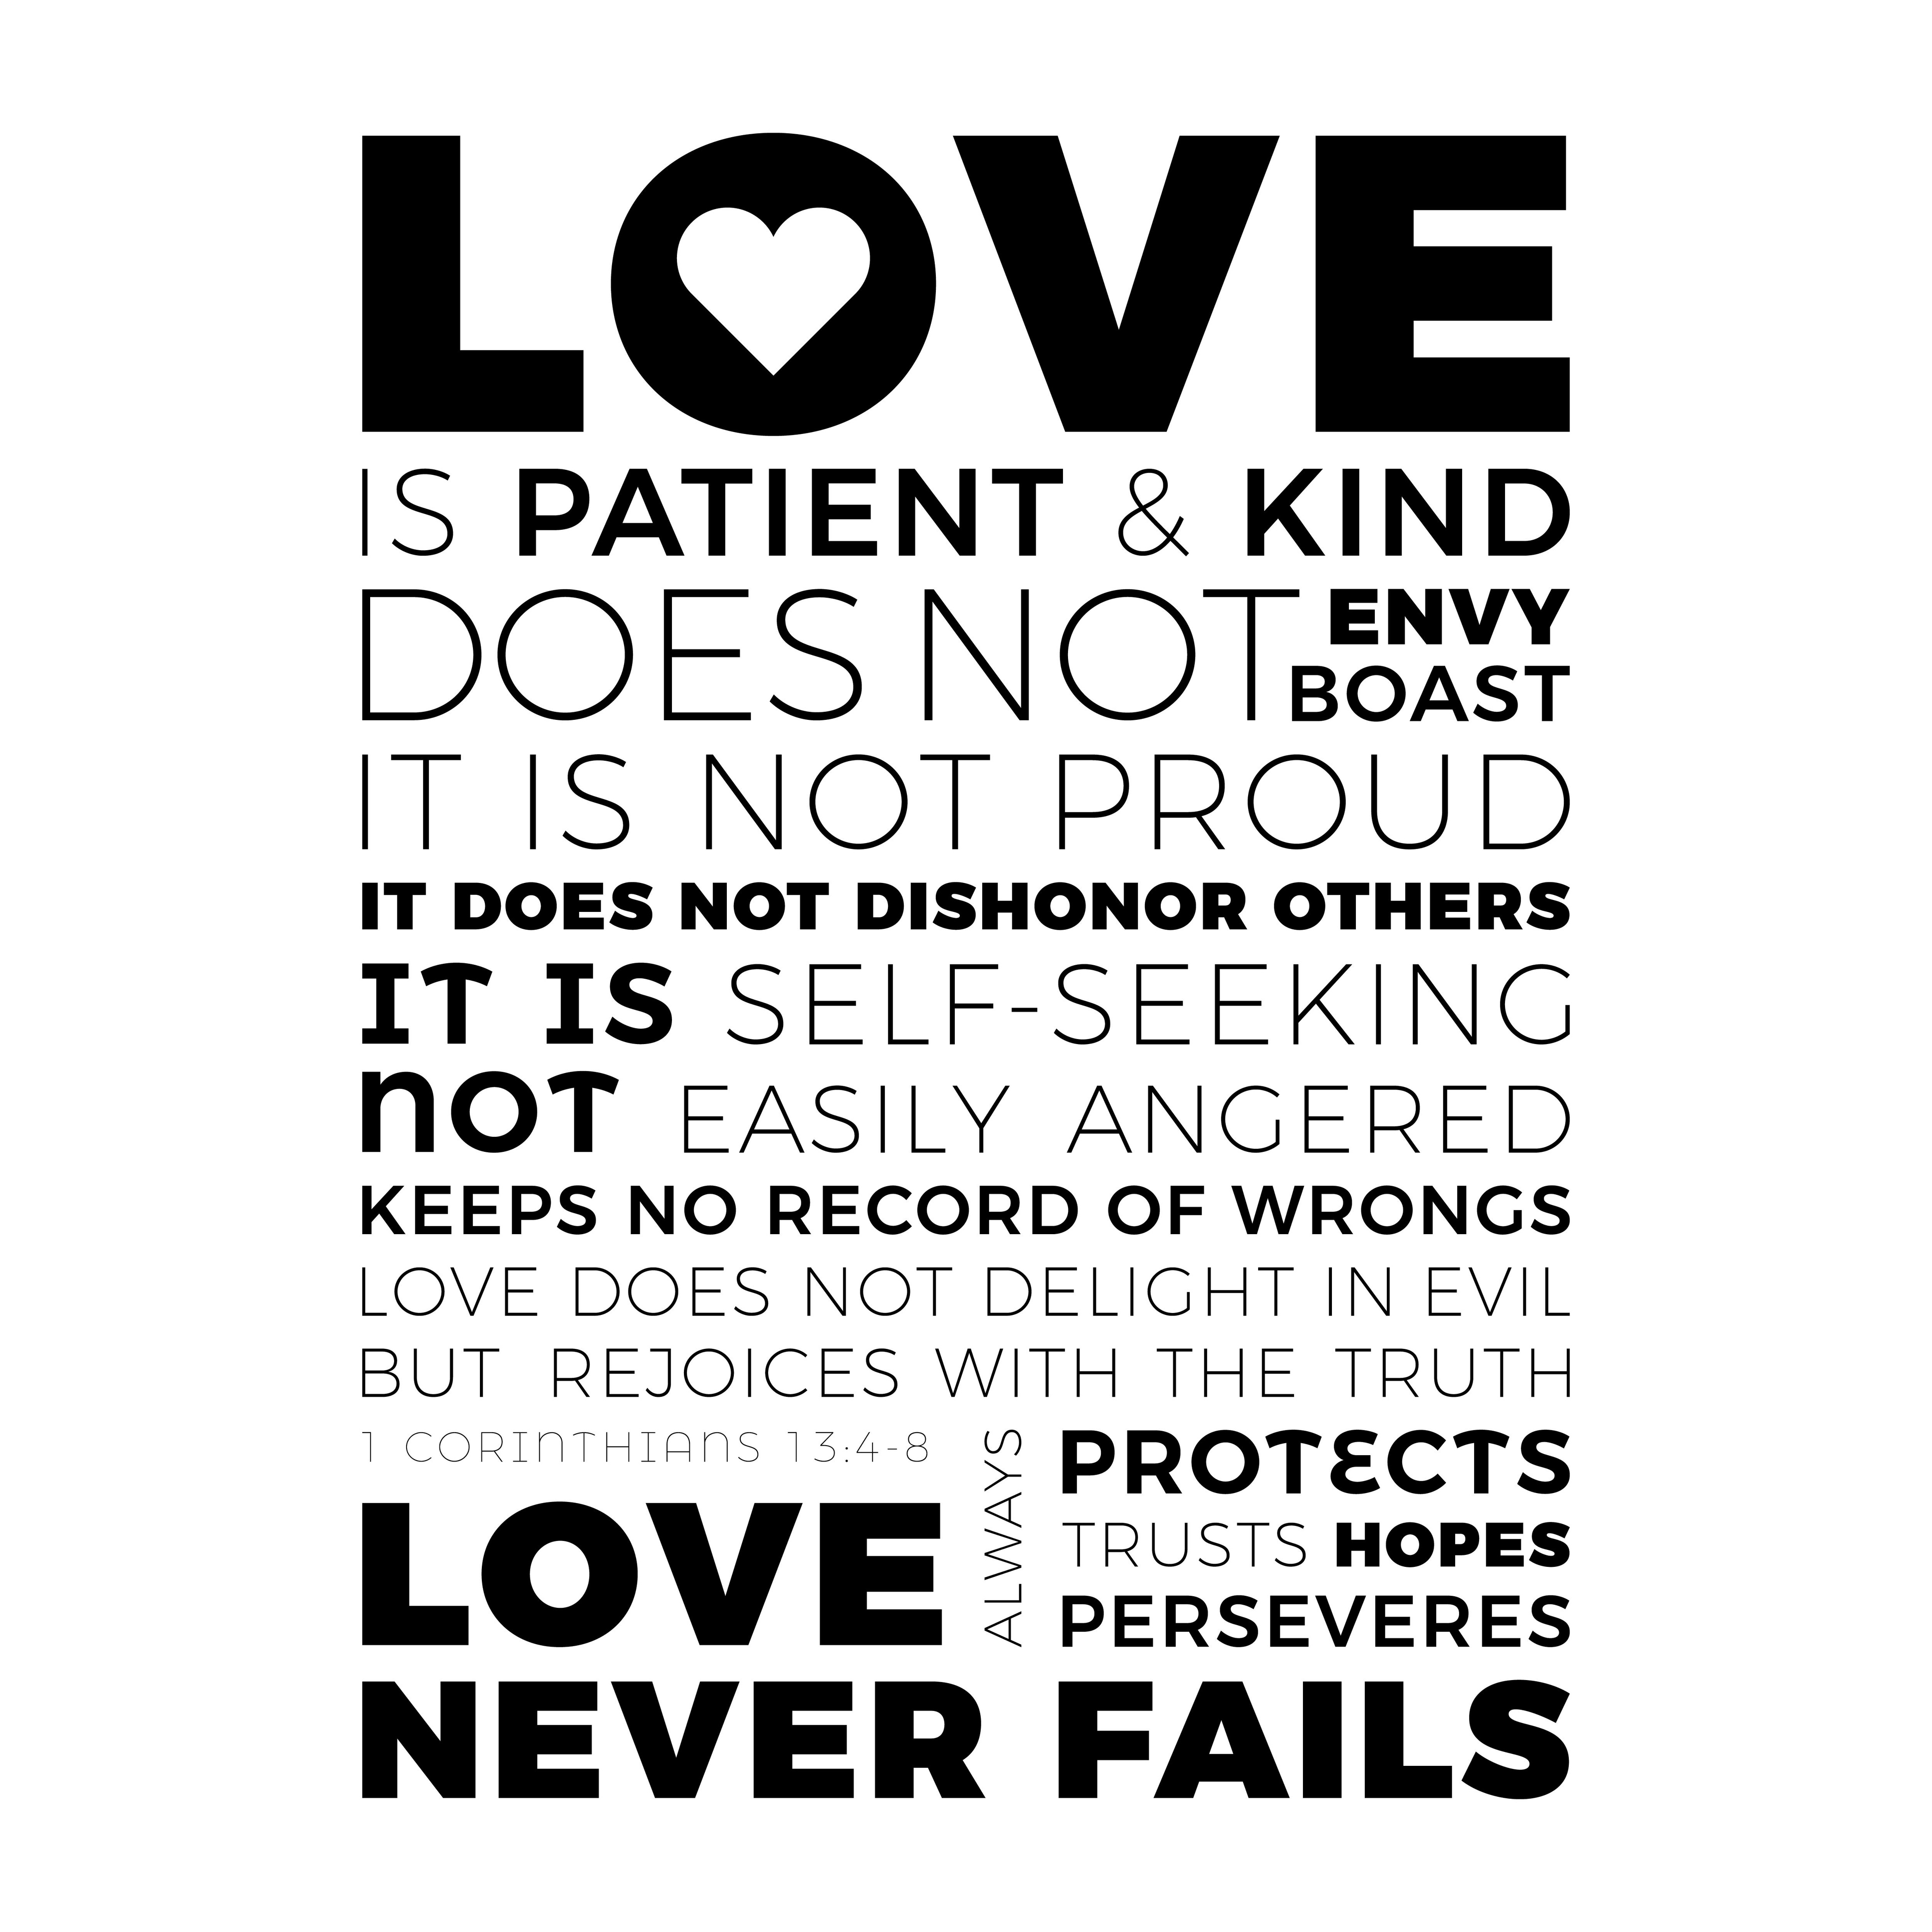 Biblical phrase from 1 Corinthians 13:8 about love. 
